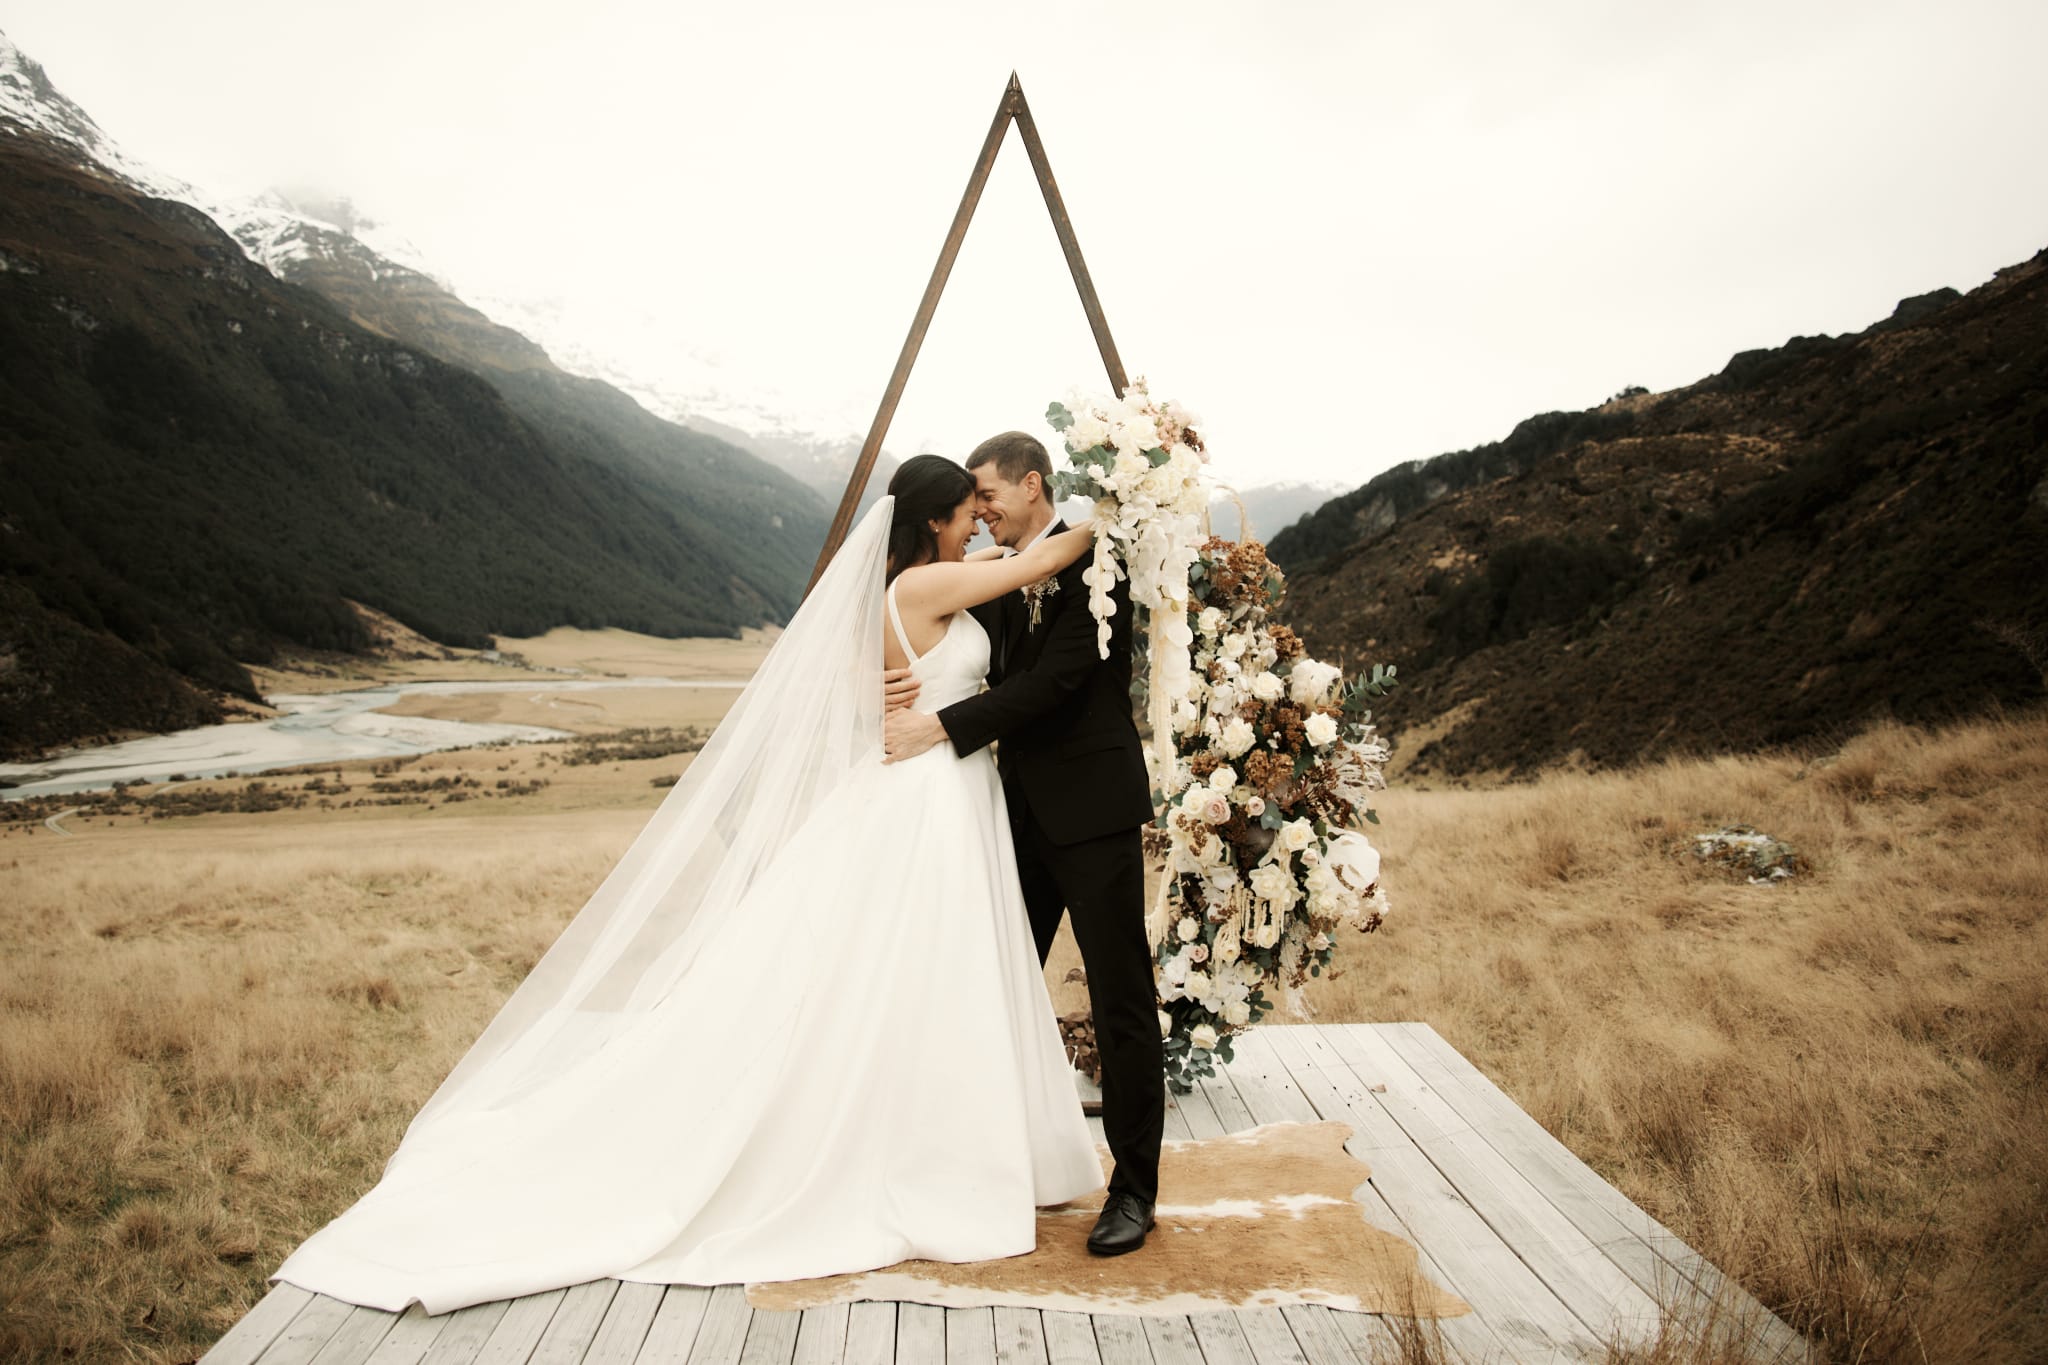 Queenstown New Zealand Elopement Wedding Photographer - Michelle and Vedran sharing a romantic kiss during their Rees Valley elopement in the mountains.